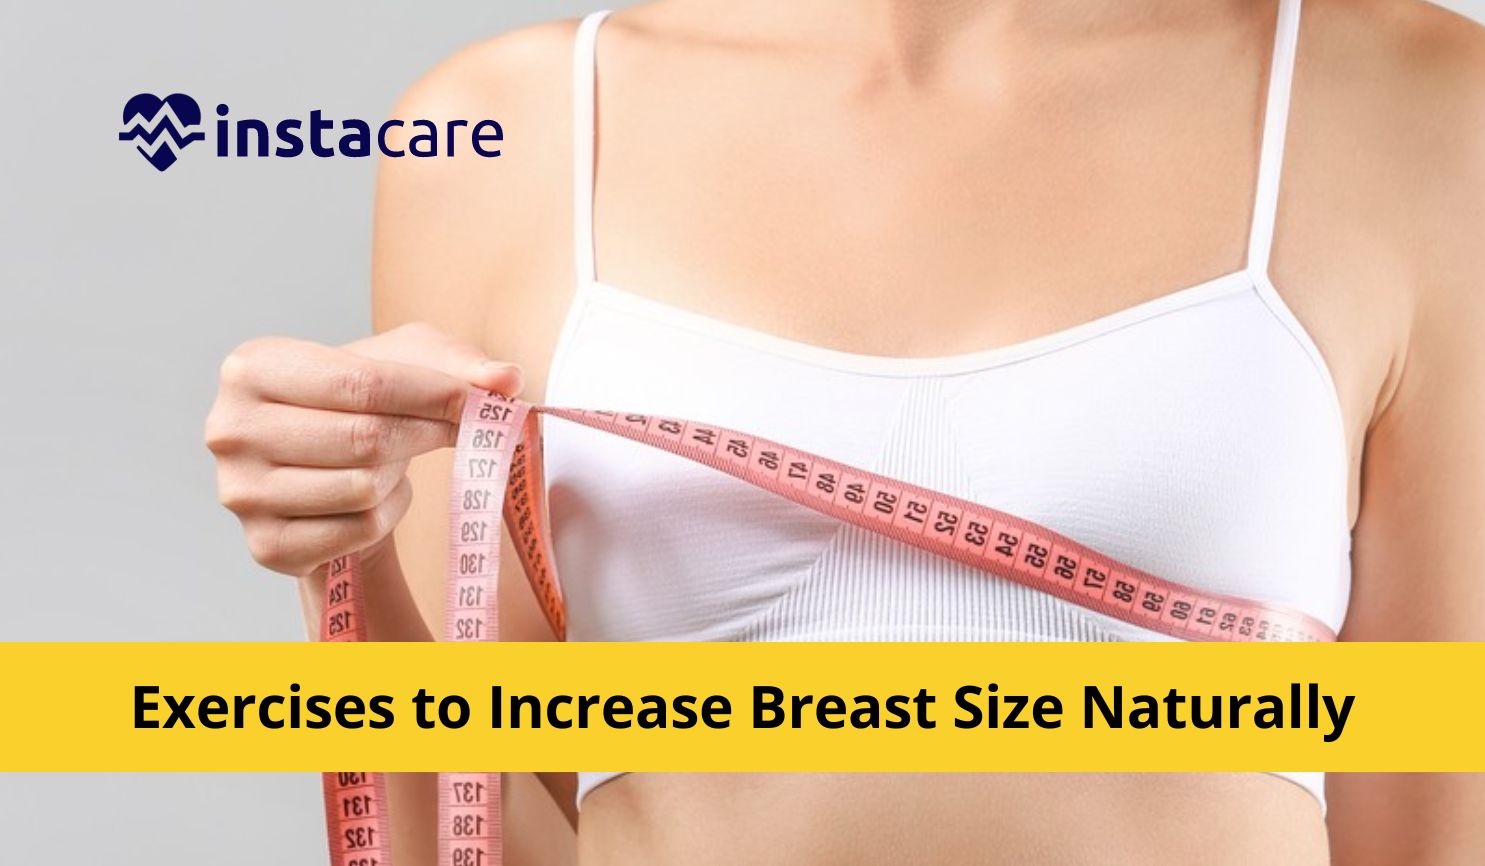 How To Increase Breast Size Naturally?